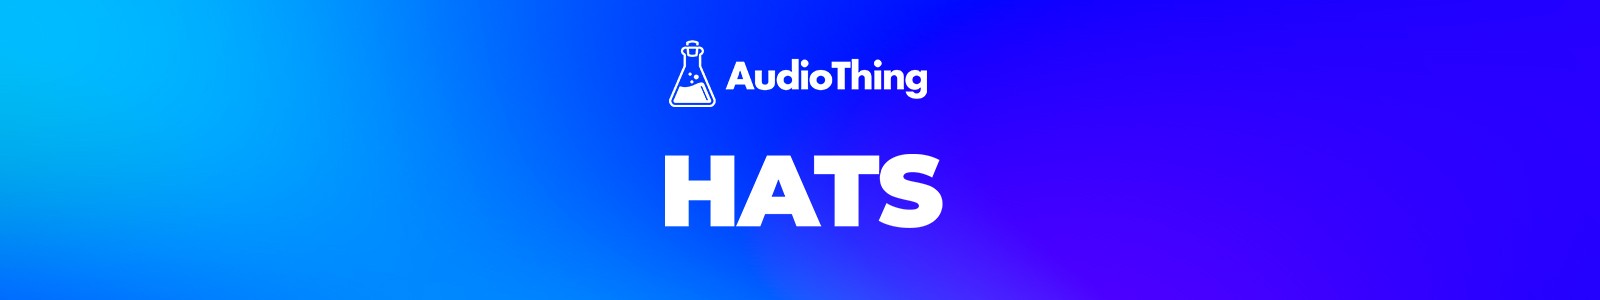 Hats: Hi-Hats and Cymbals by AudioThing